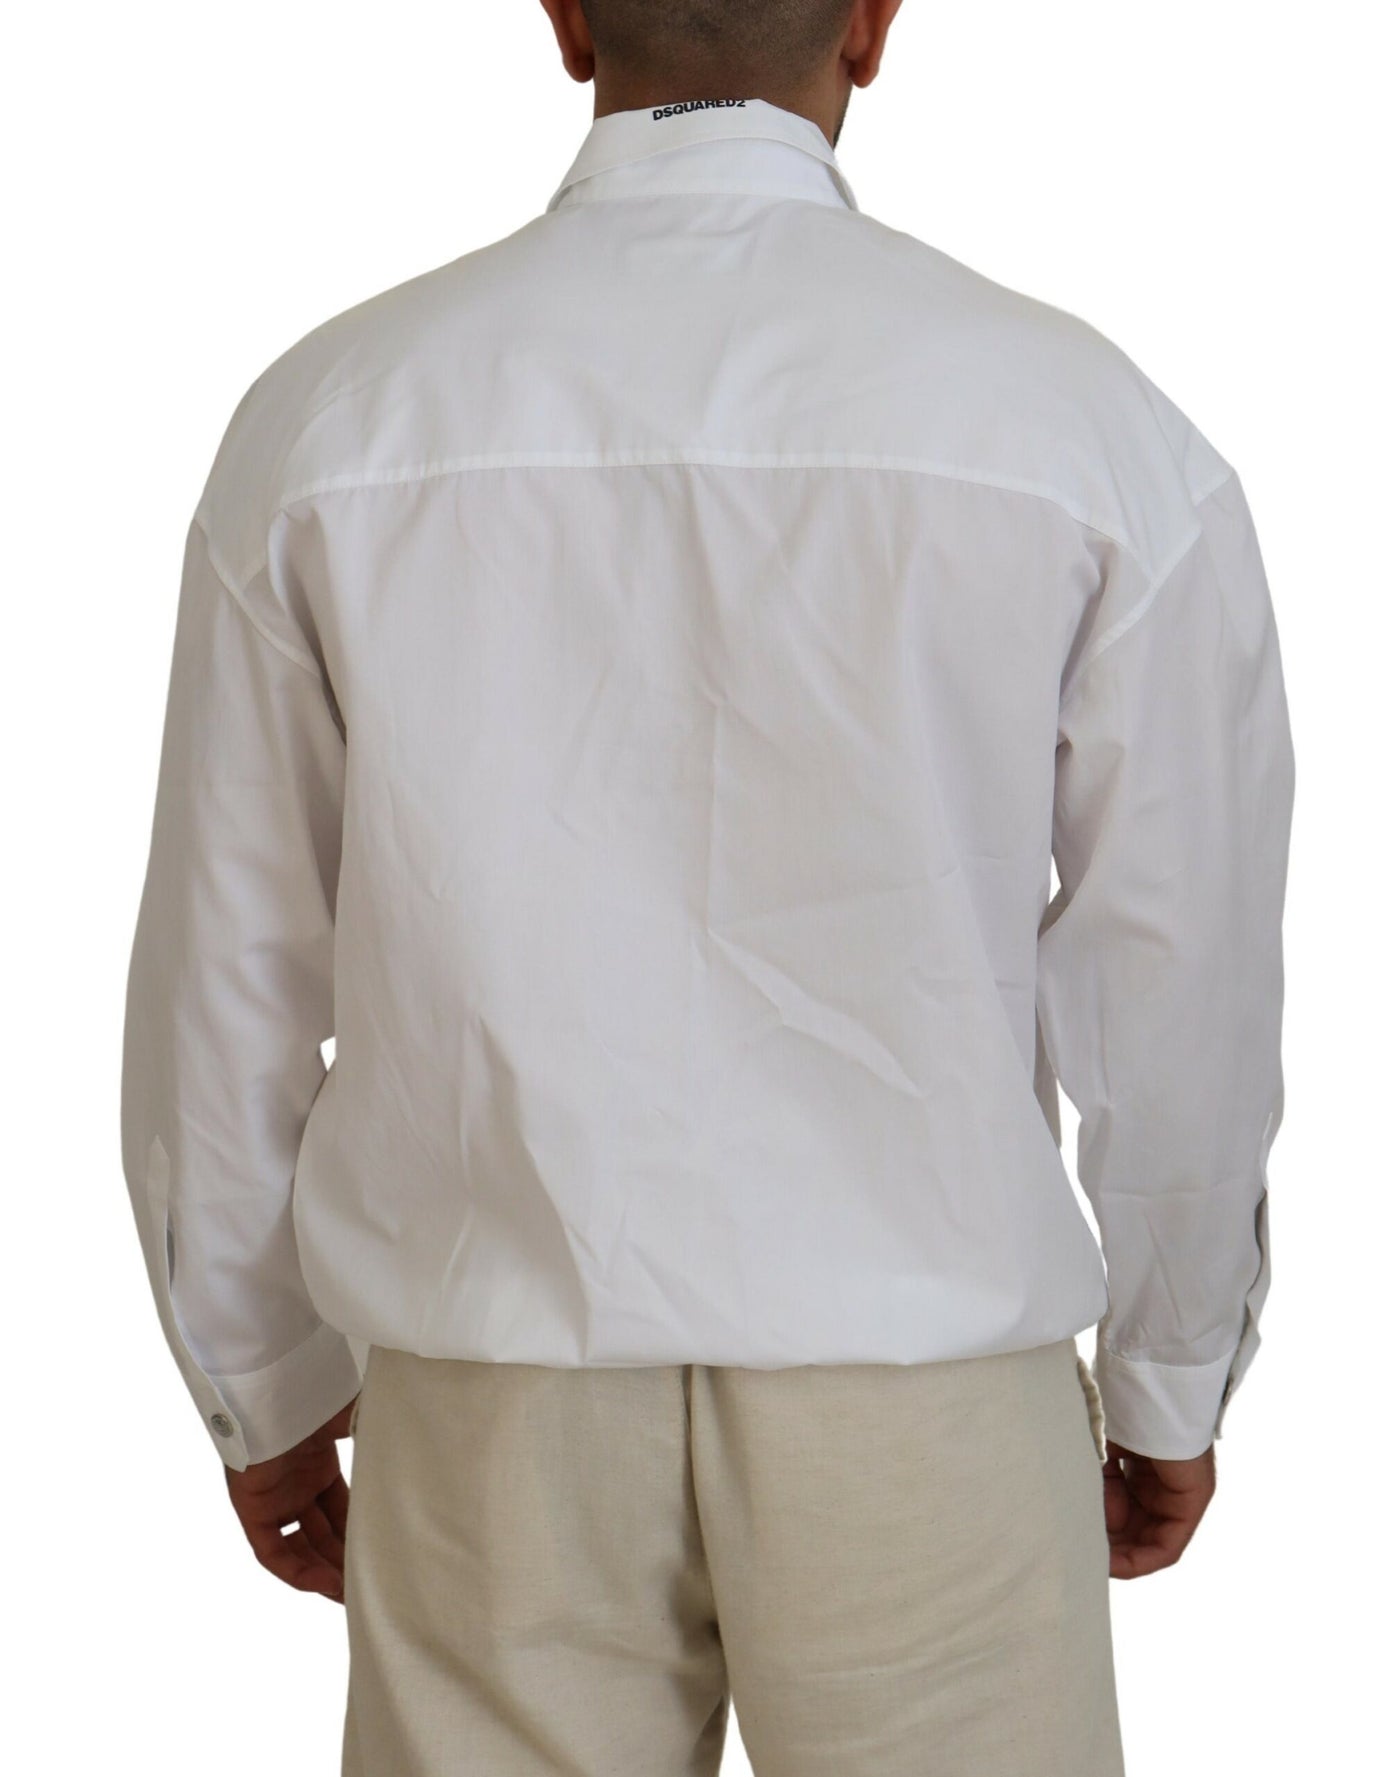 Dsquared² White Cotton Collared Casual Men Long Sleeves Jacket